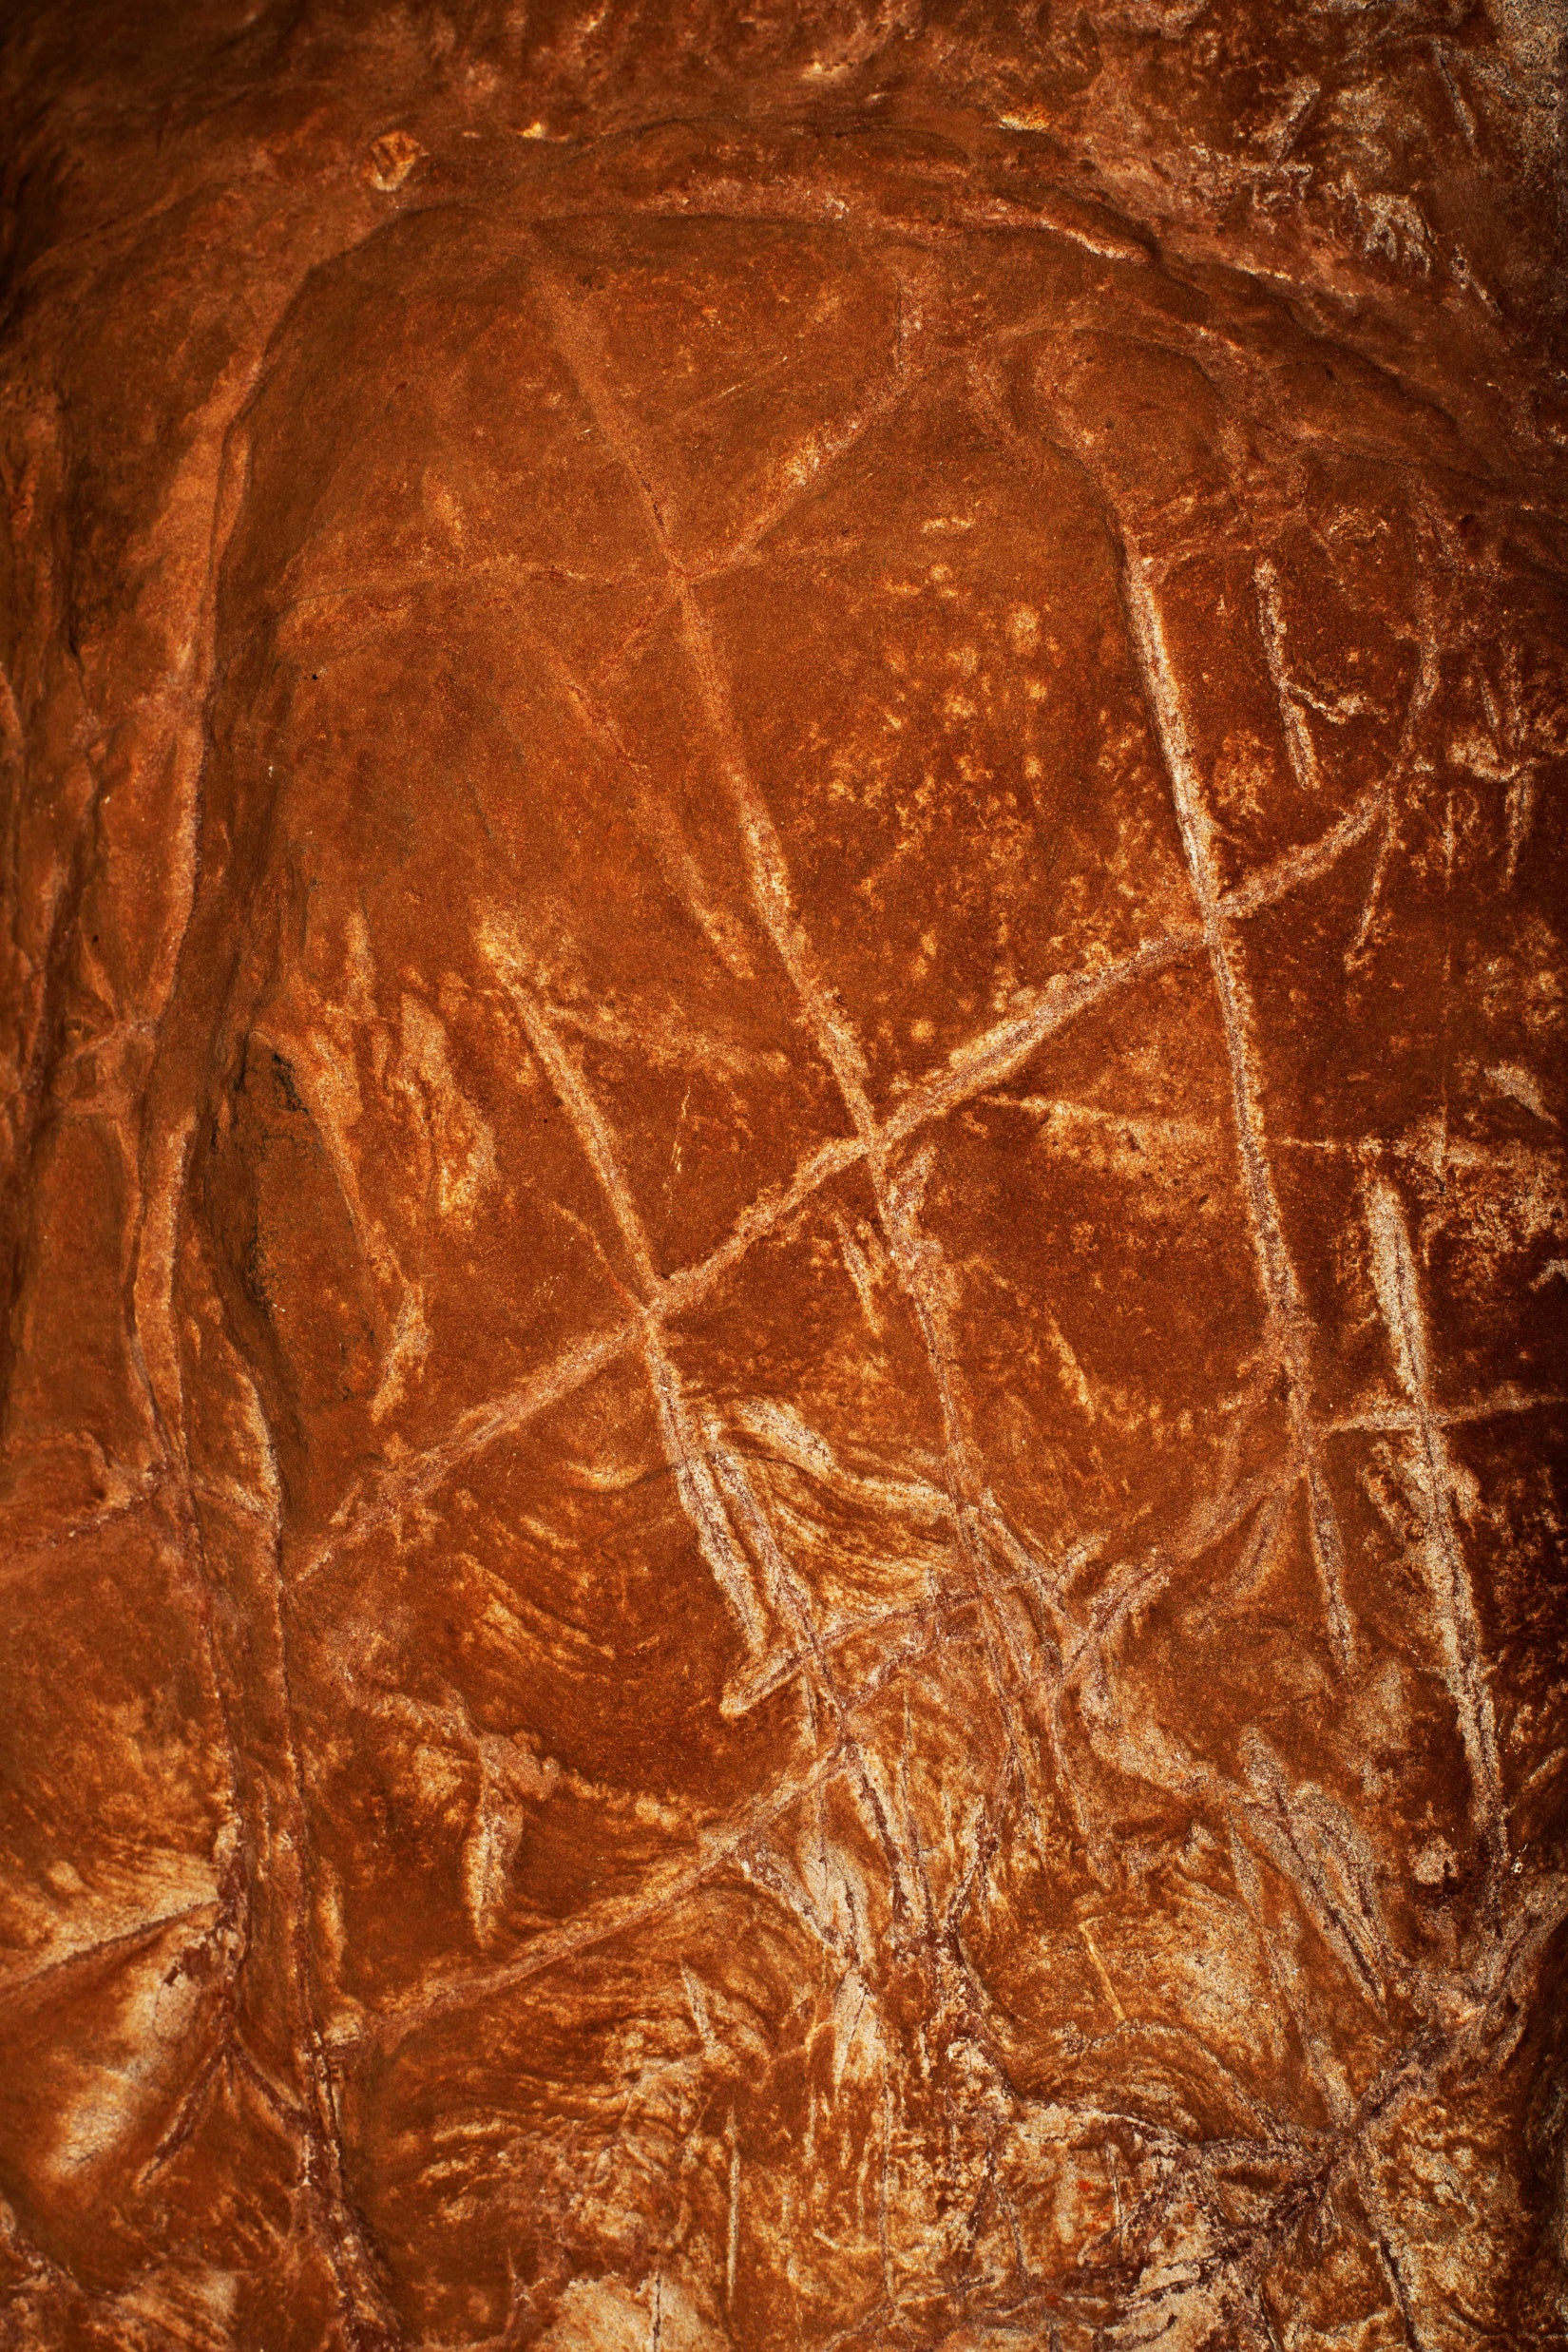 Engravings on cave walls in Rising Star.